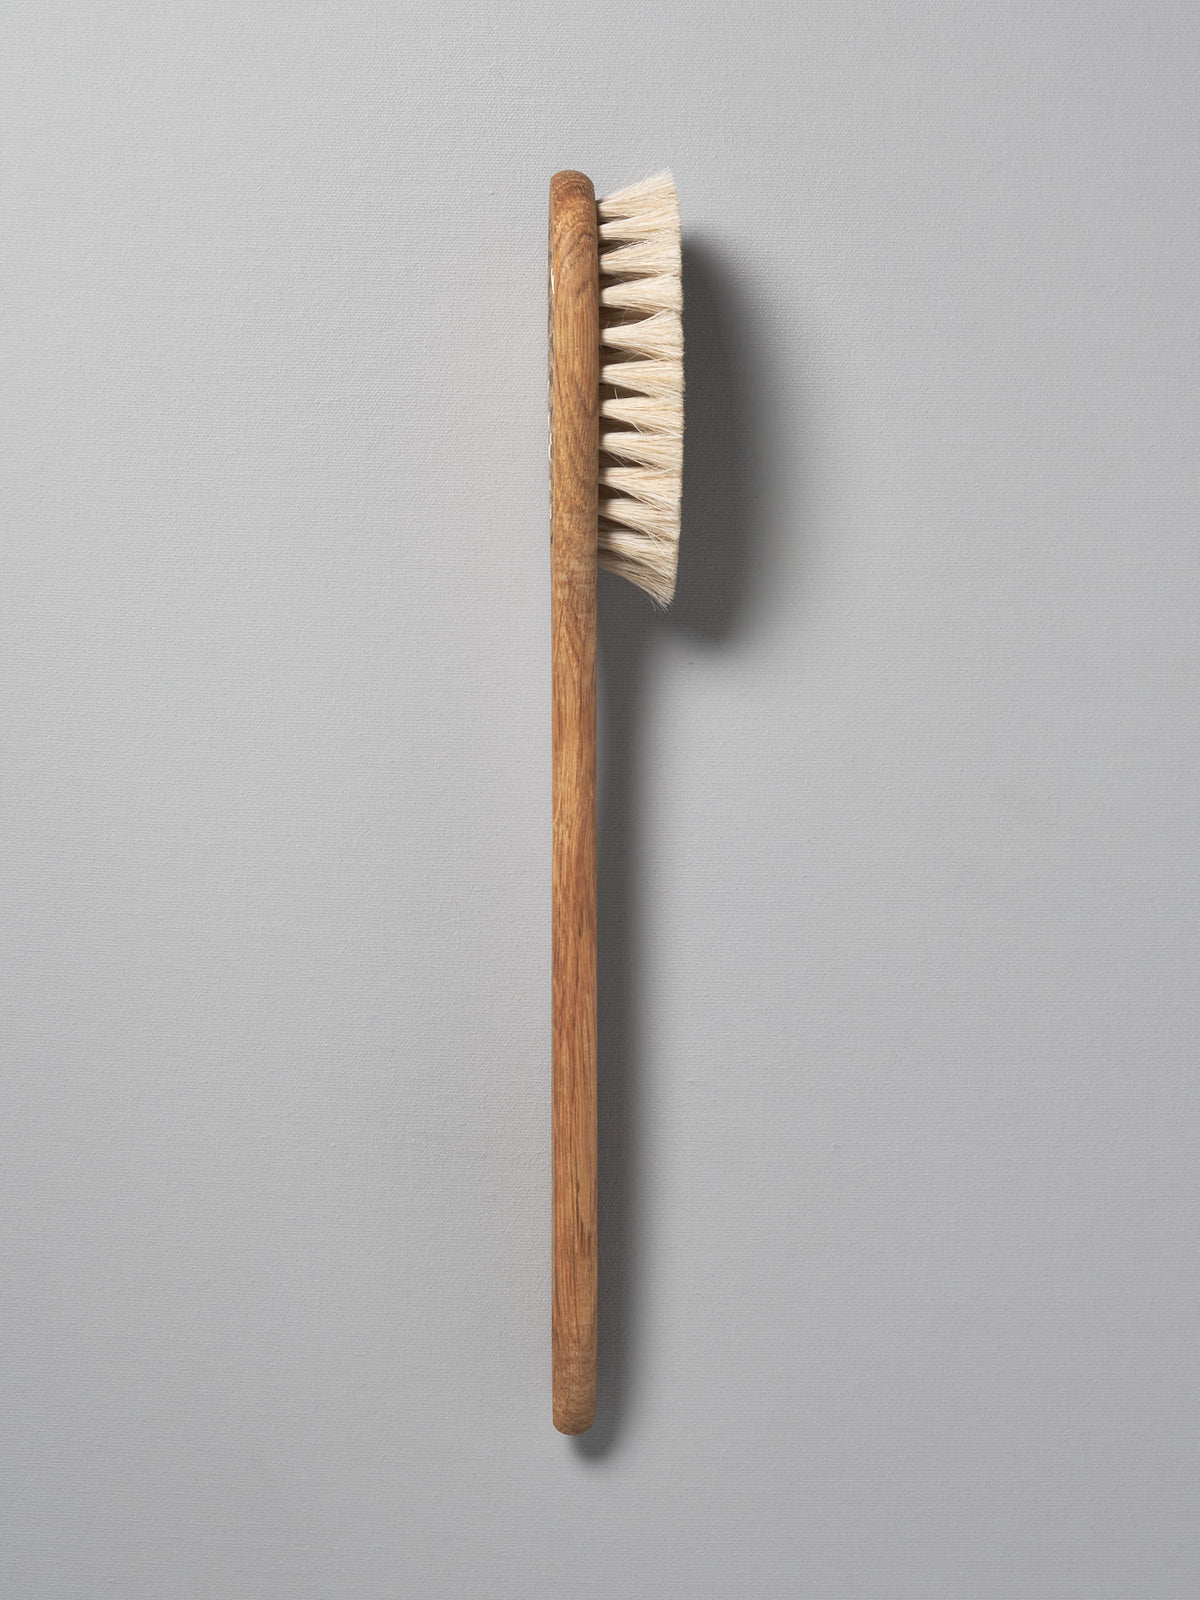 An Iris Hantverk Body Brush – Oval Head with a wooden handle on a gray background.